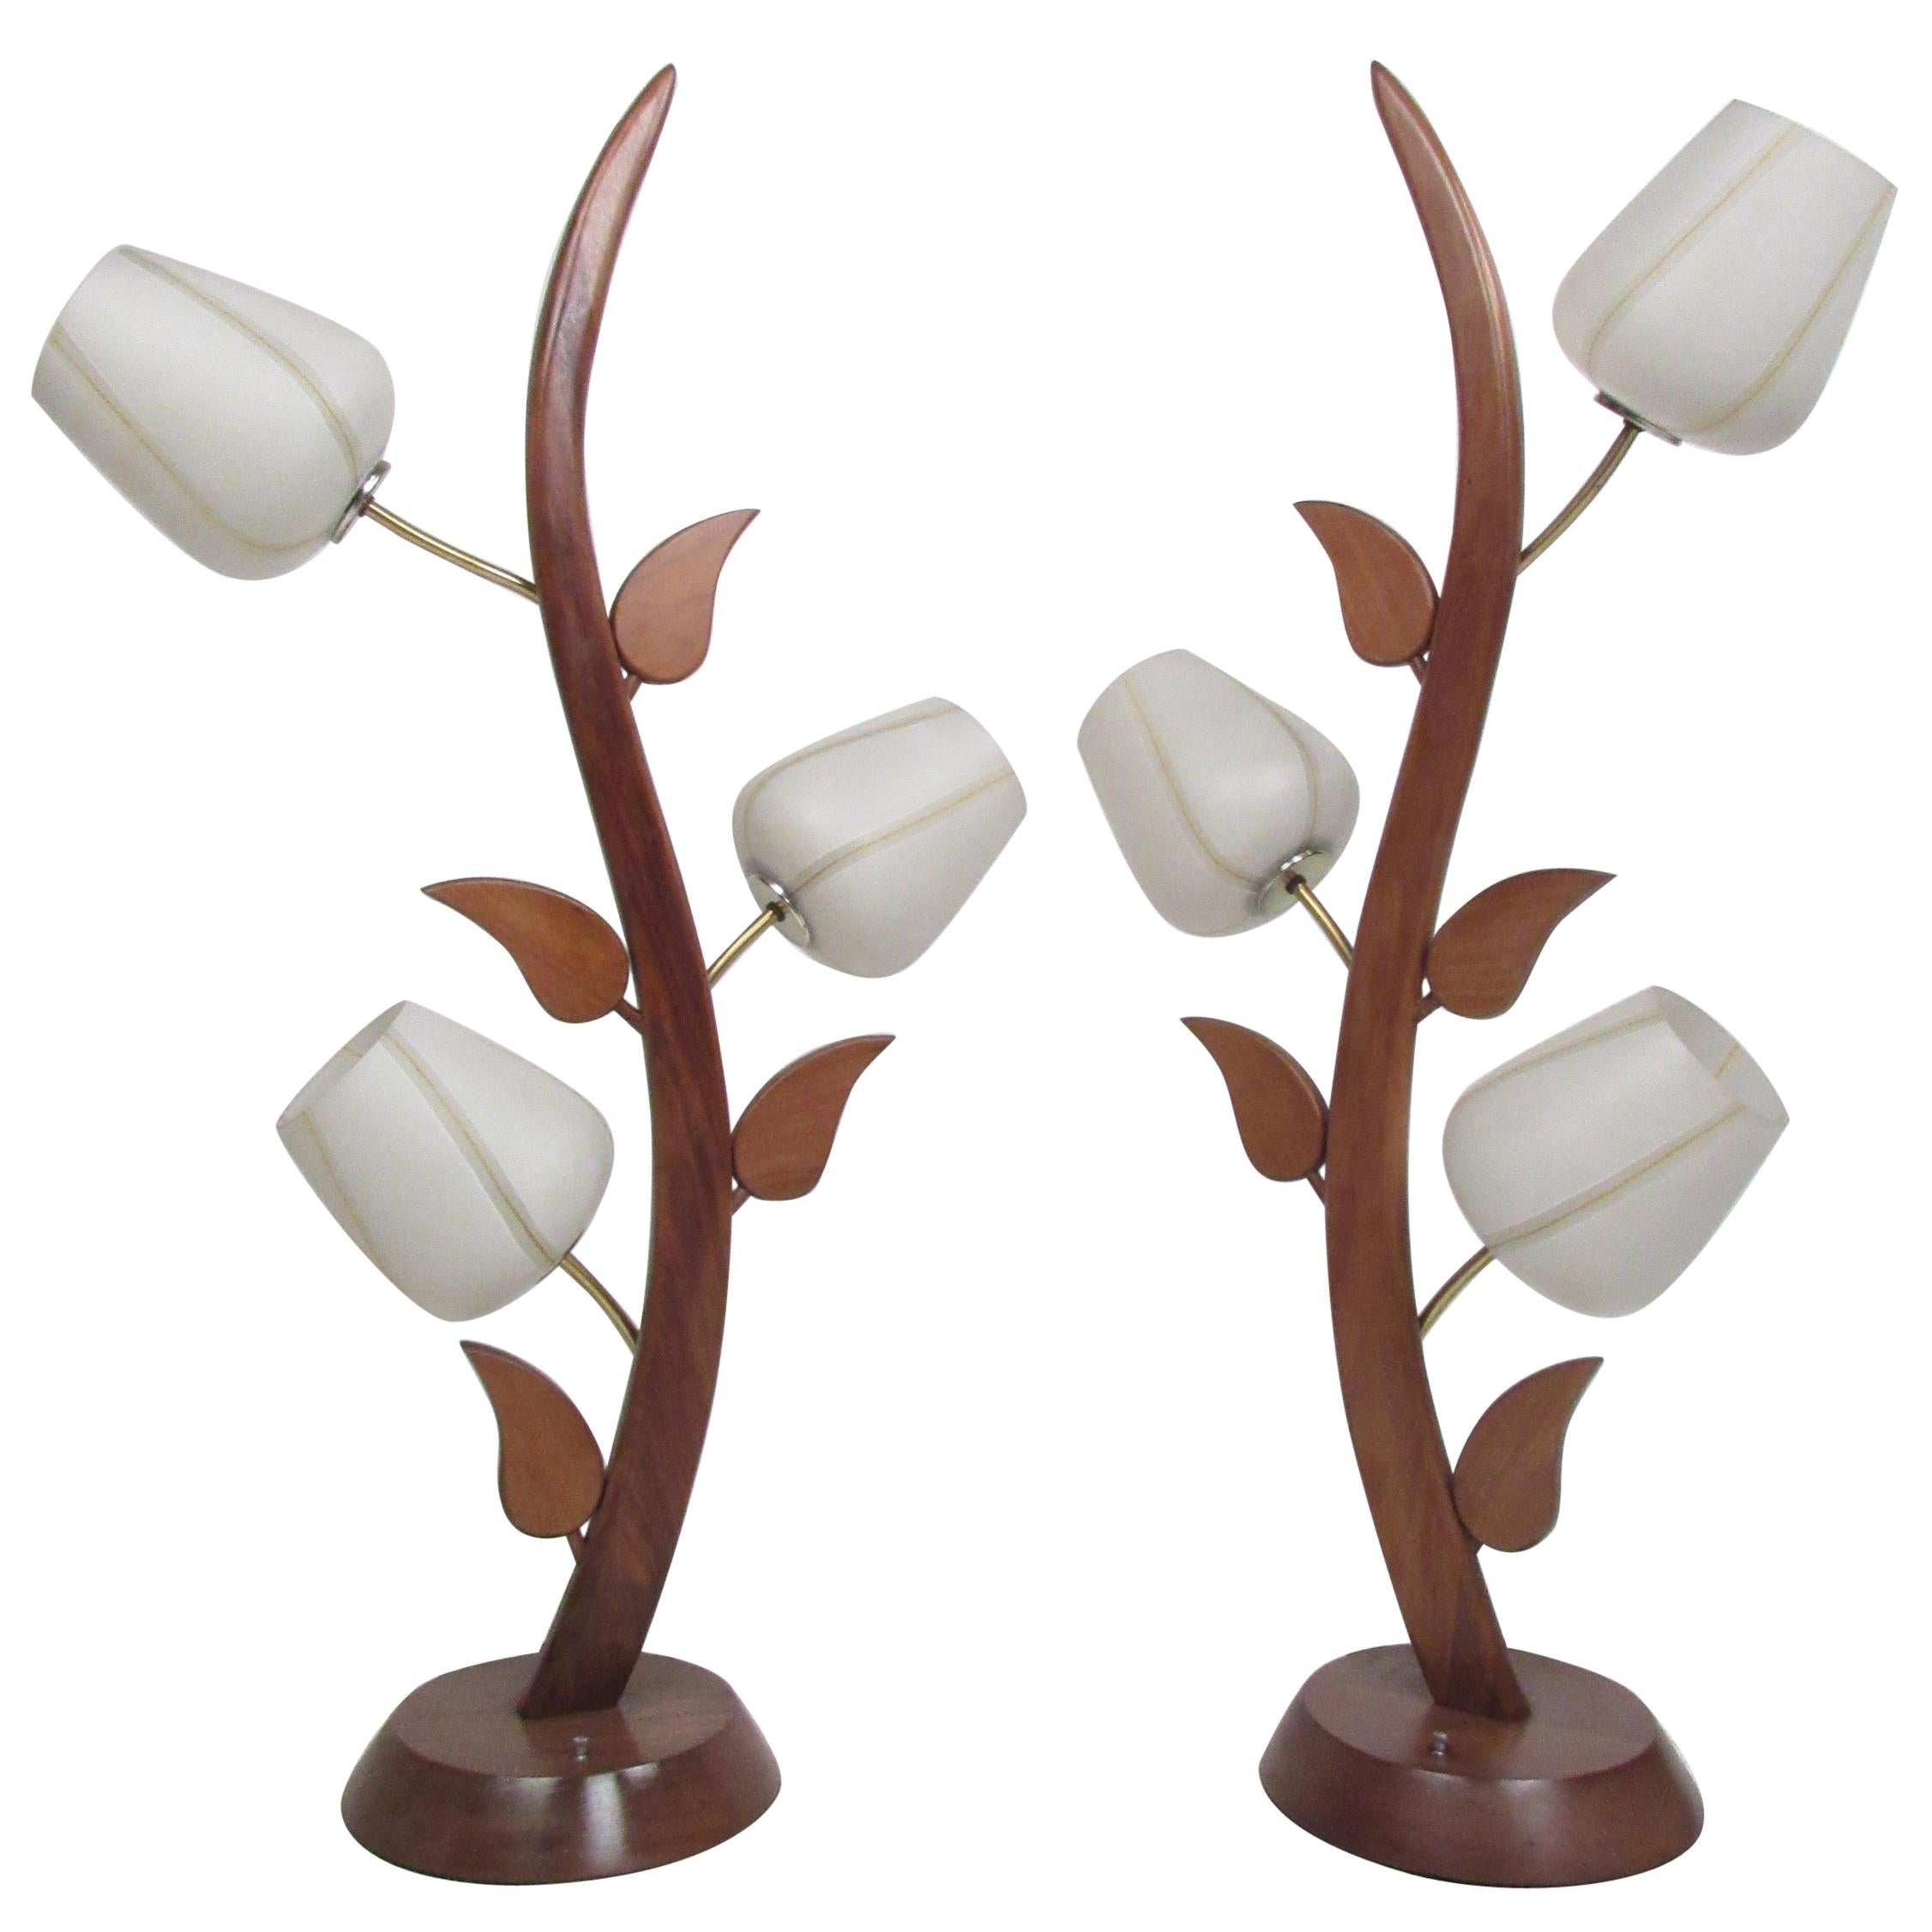 Pair of Vintage Floral-Inspired Lamps